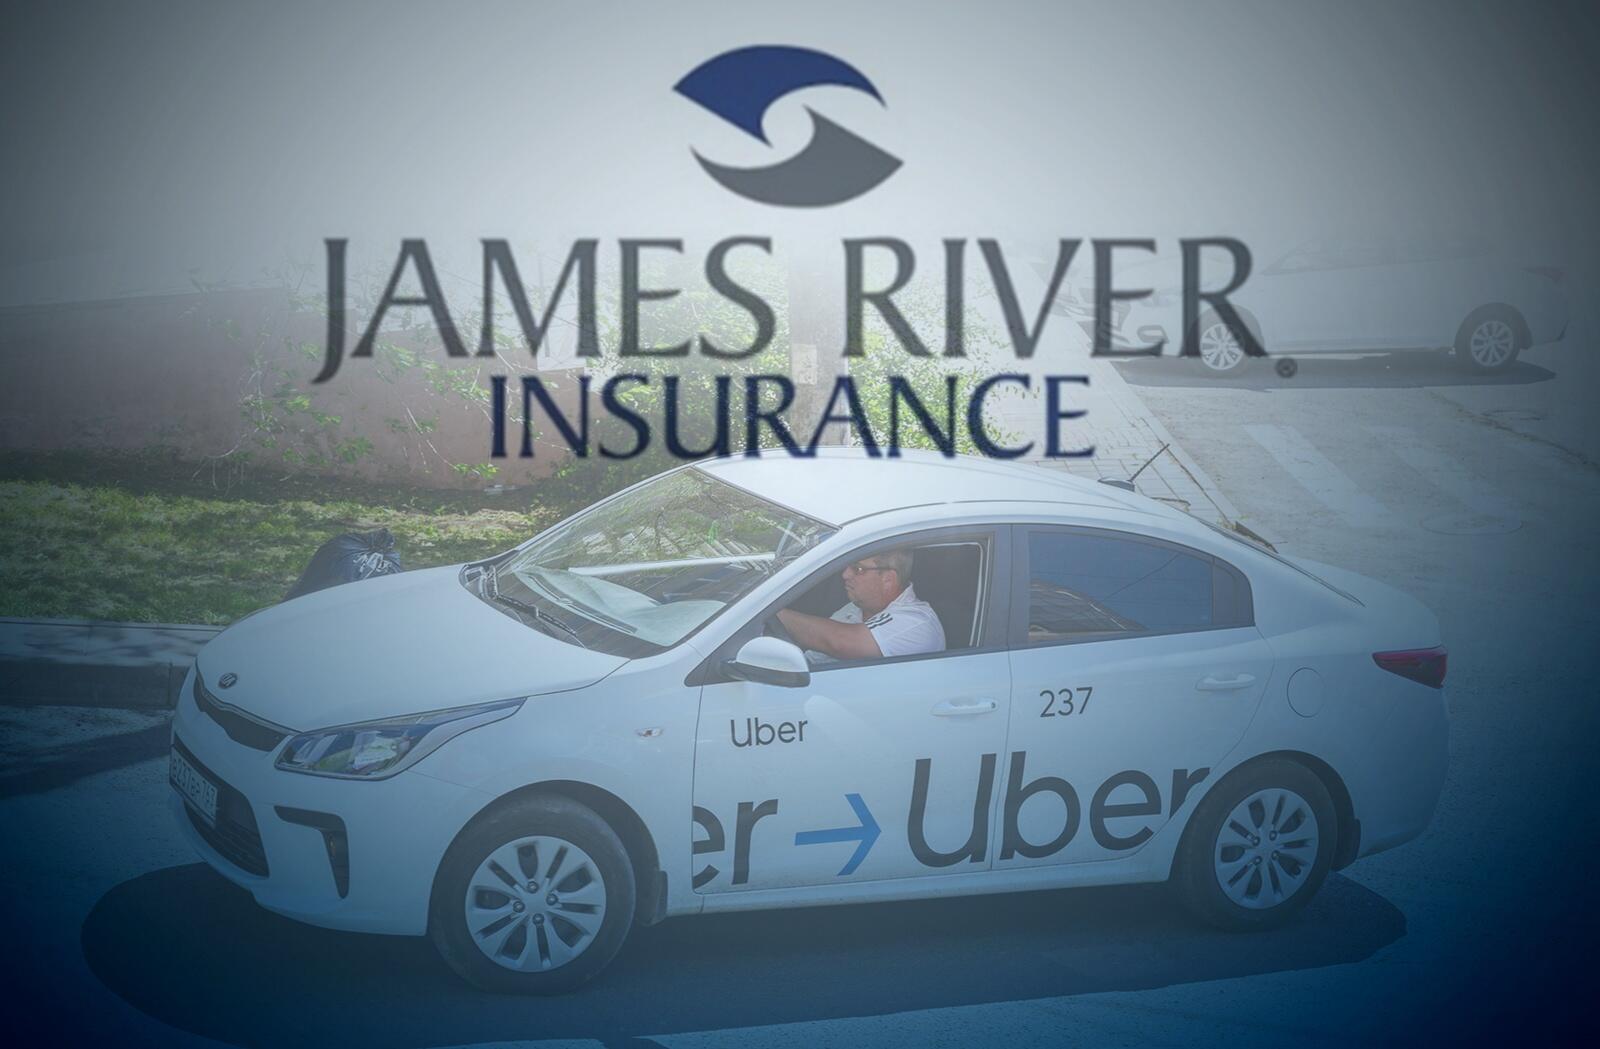 James River Insurance and Uber